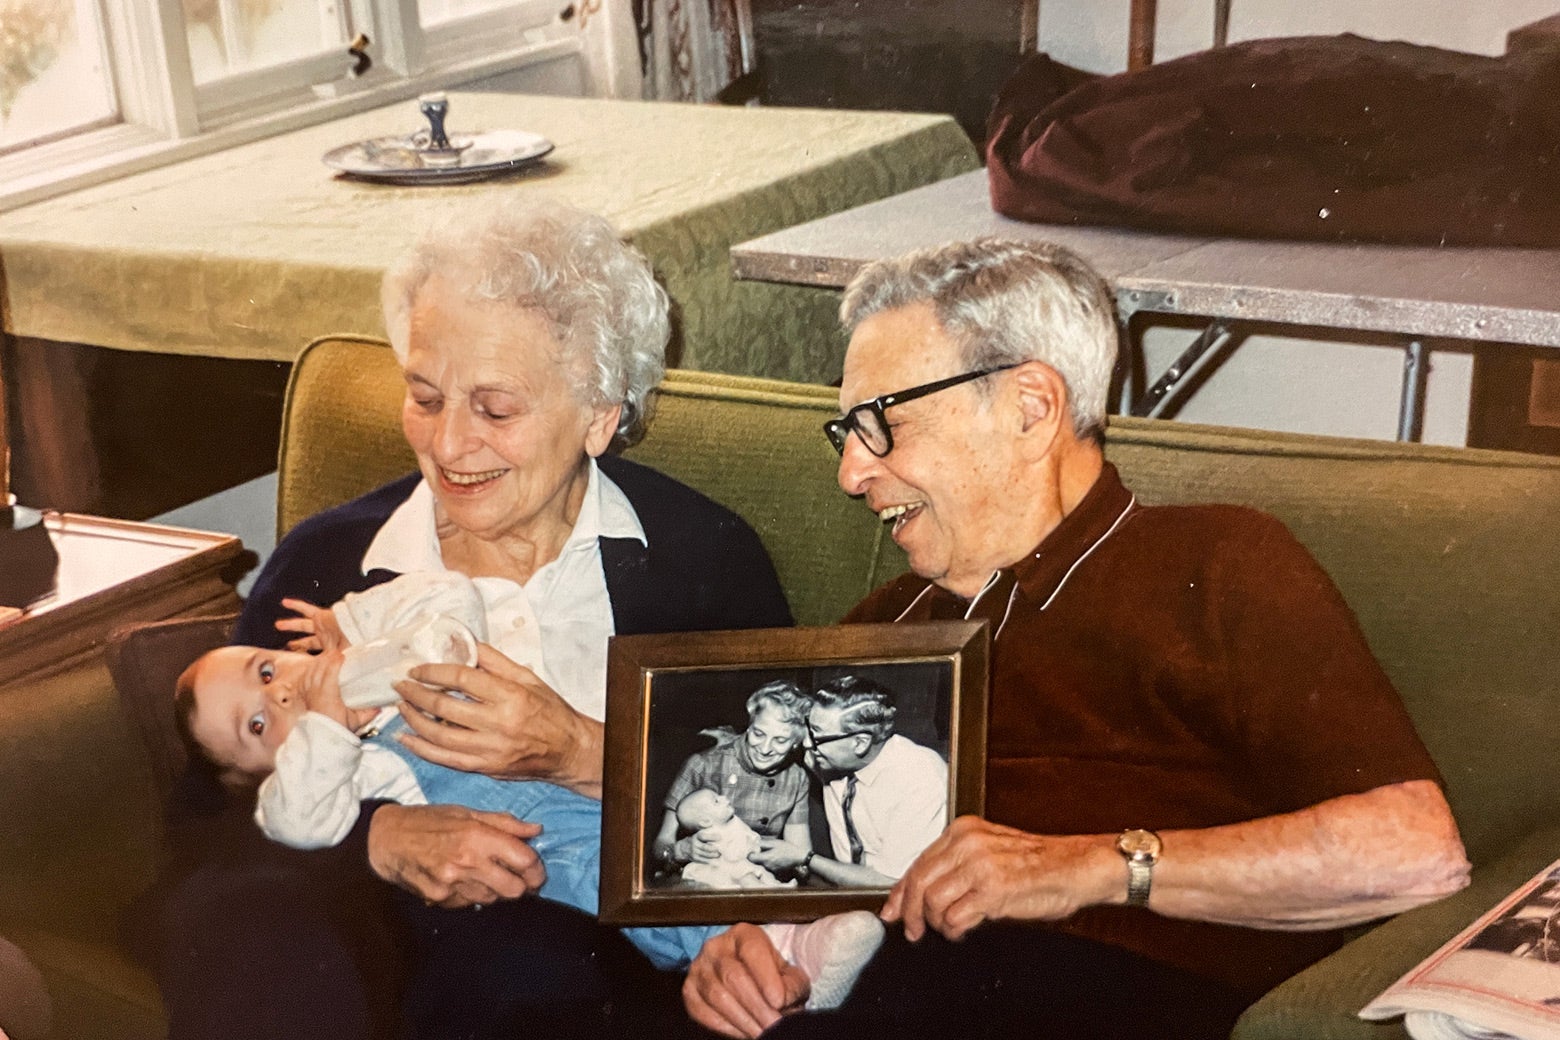 George Michaels, with his wife and one of his granddaughters, holding a photo of his first granddaughter.